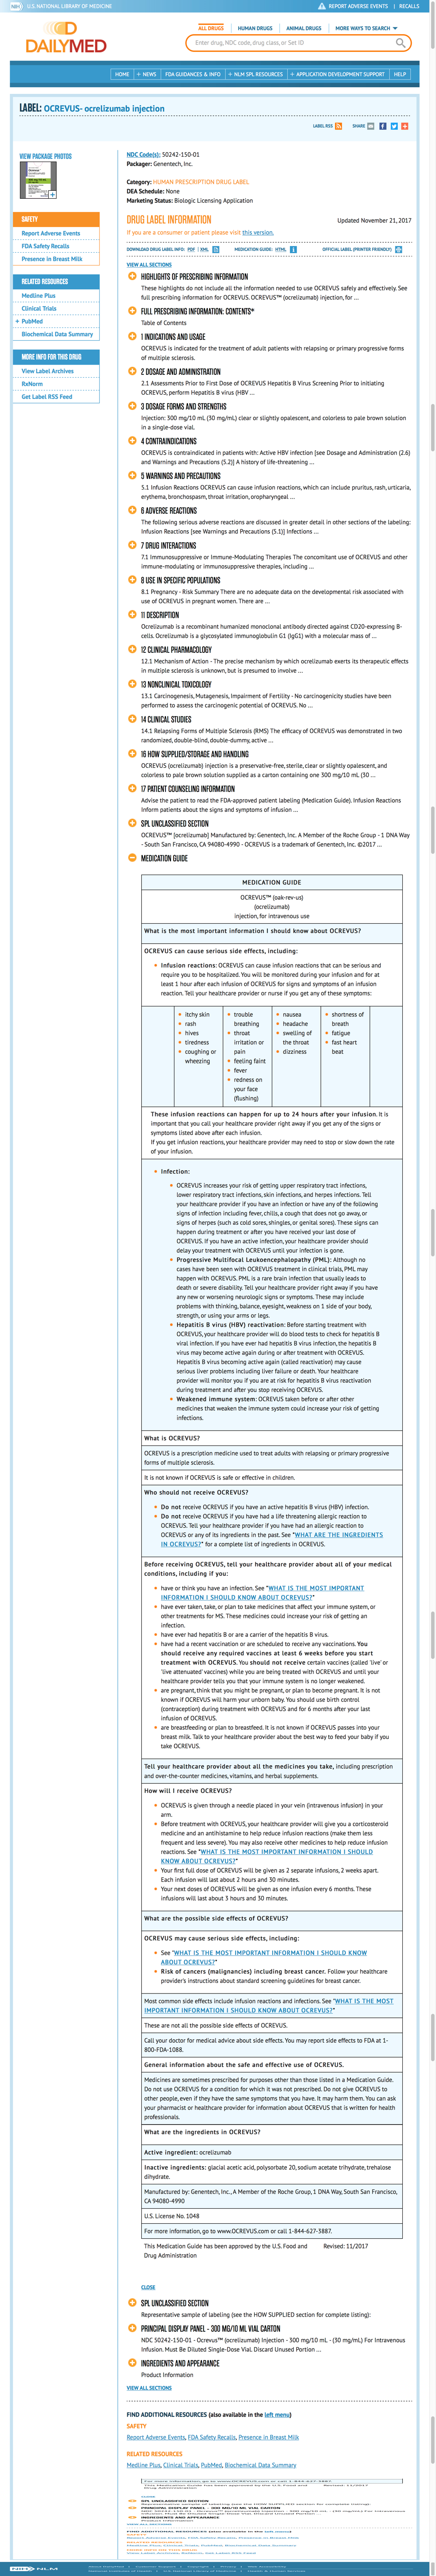 File:Ocrelizumab Patient Counseling Information.png